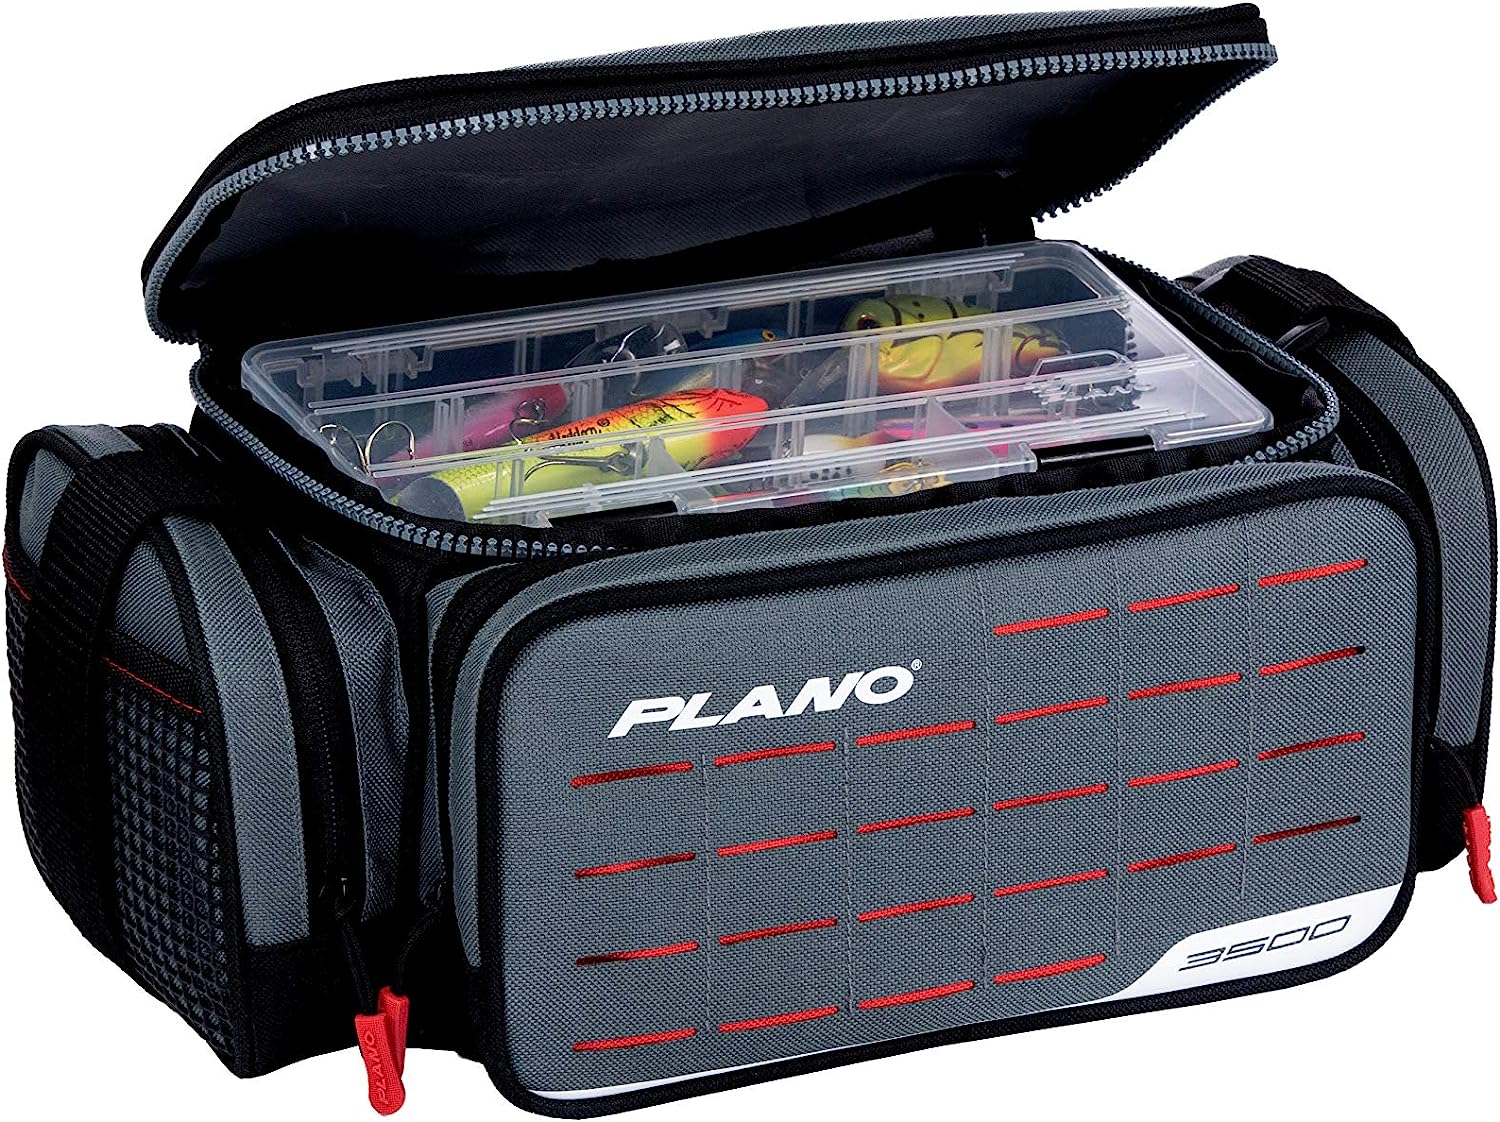 Plano Weekend Series 3500 Softsider Tackle Bag, Gray Fabric, Includes 2  3500 Stowaway Storage Boxes, Soft Fishing Tackle Bag for Baits & Lures,  Water-Resistant $14.22